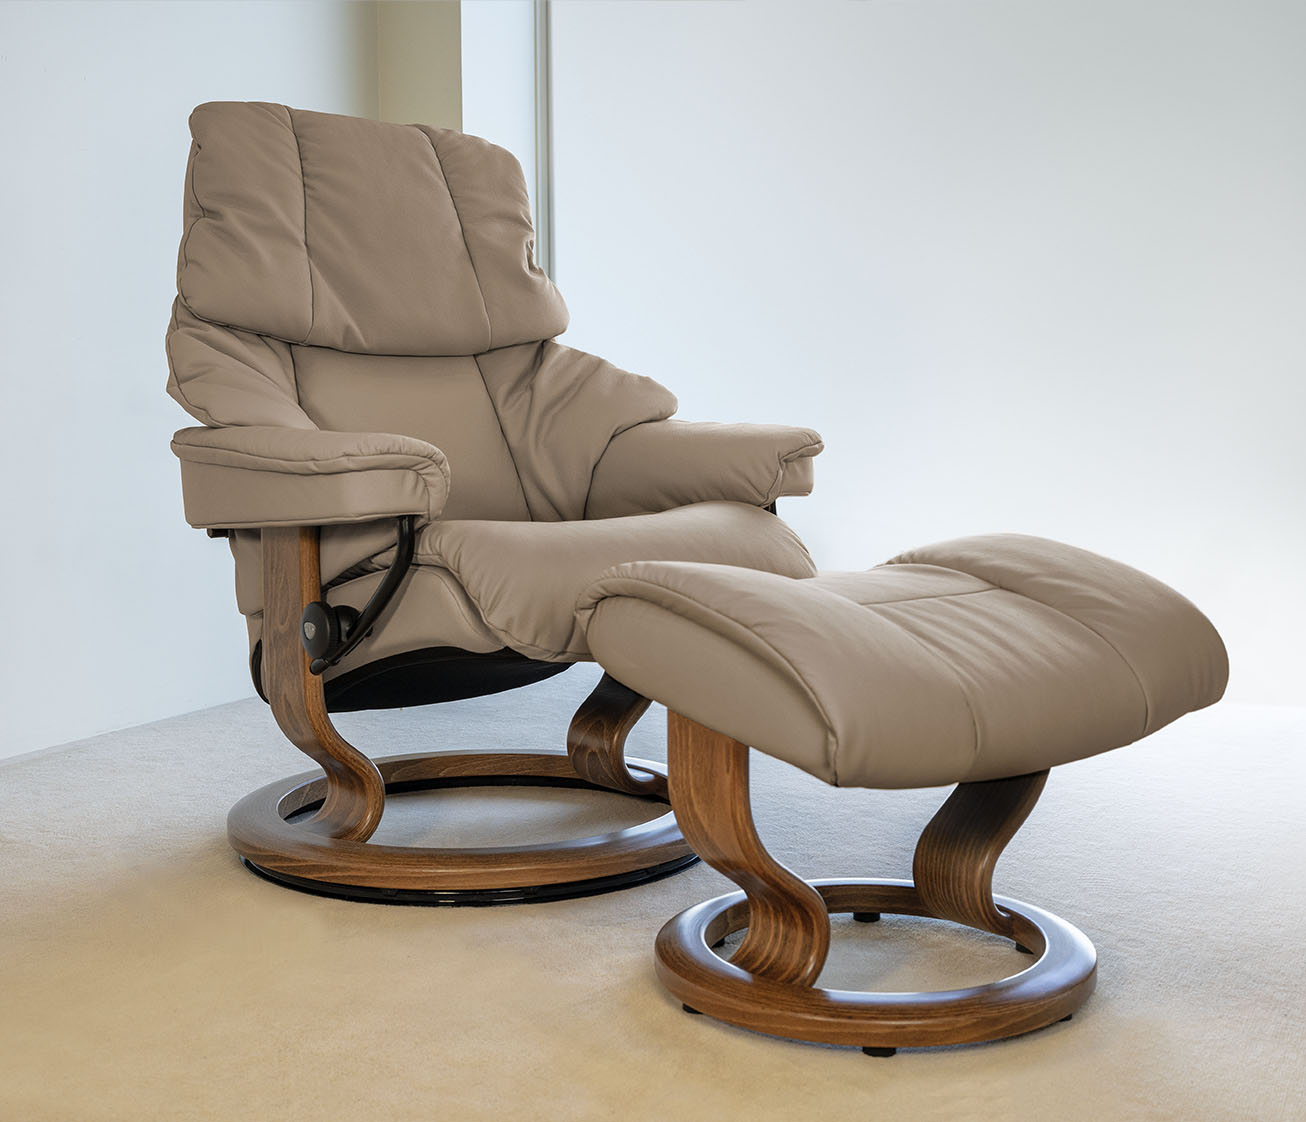 Stressless Reno Recliner with a stool - Latte Batick Leather - Teak Classic Base